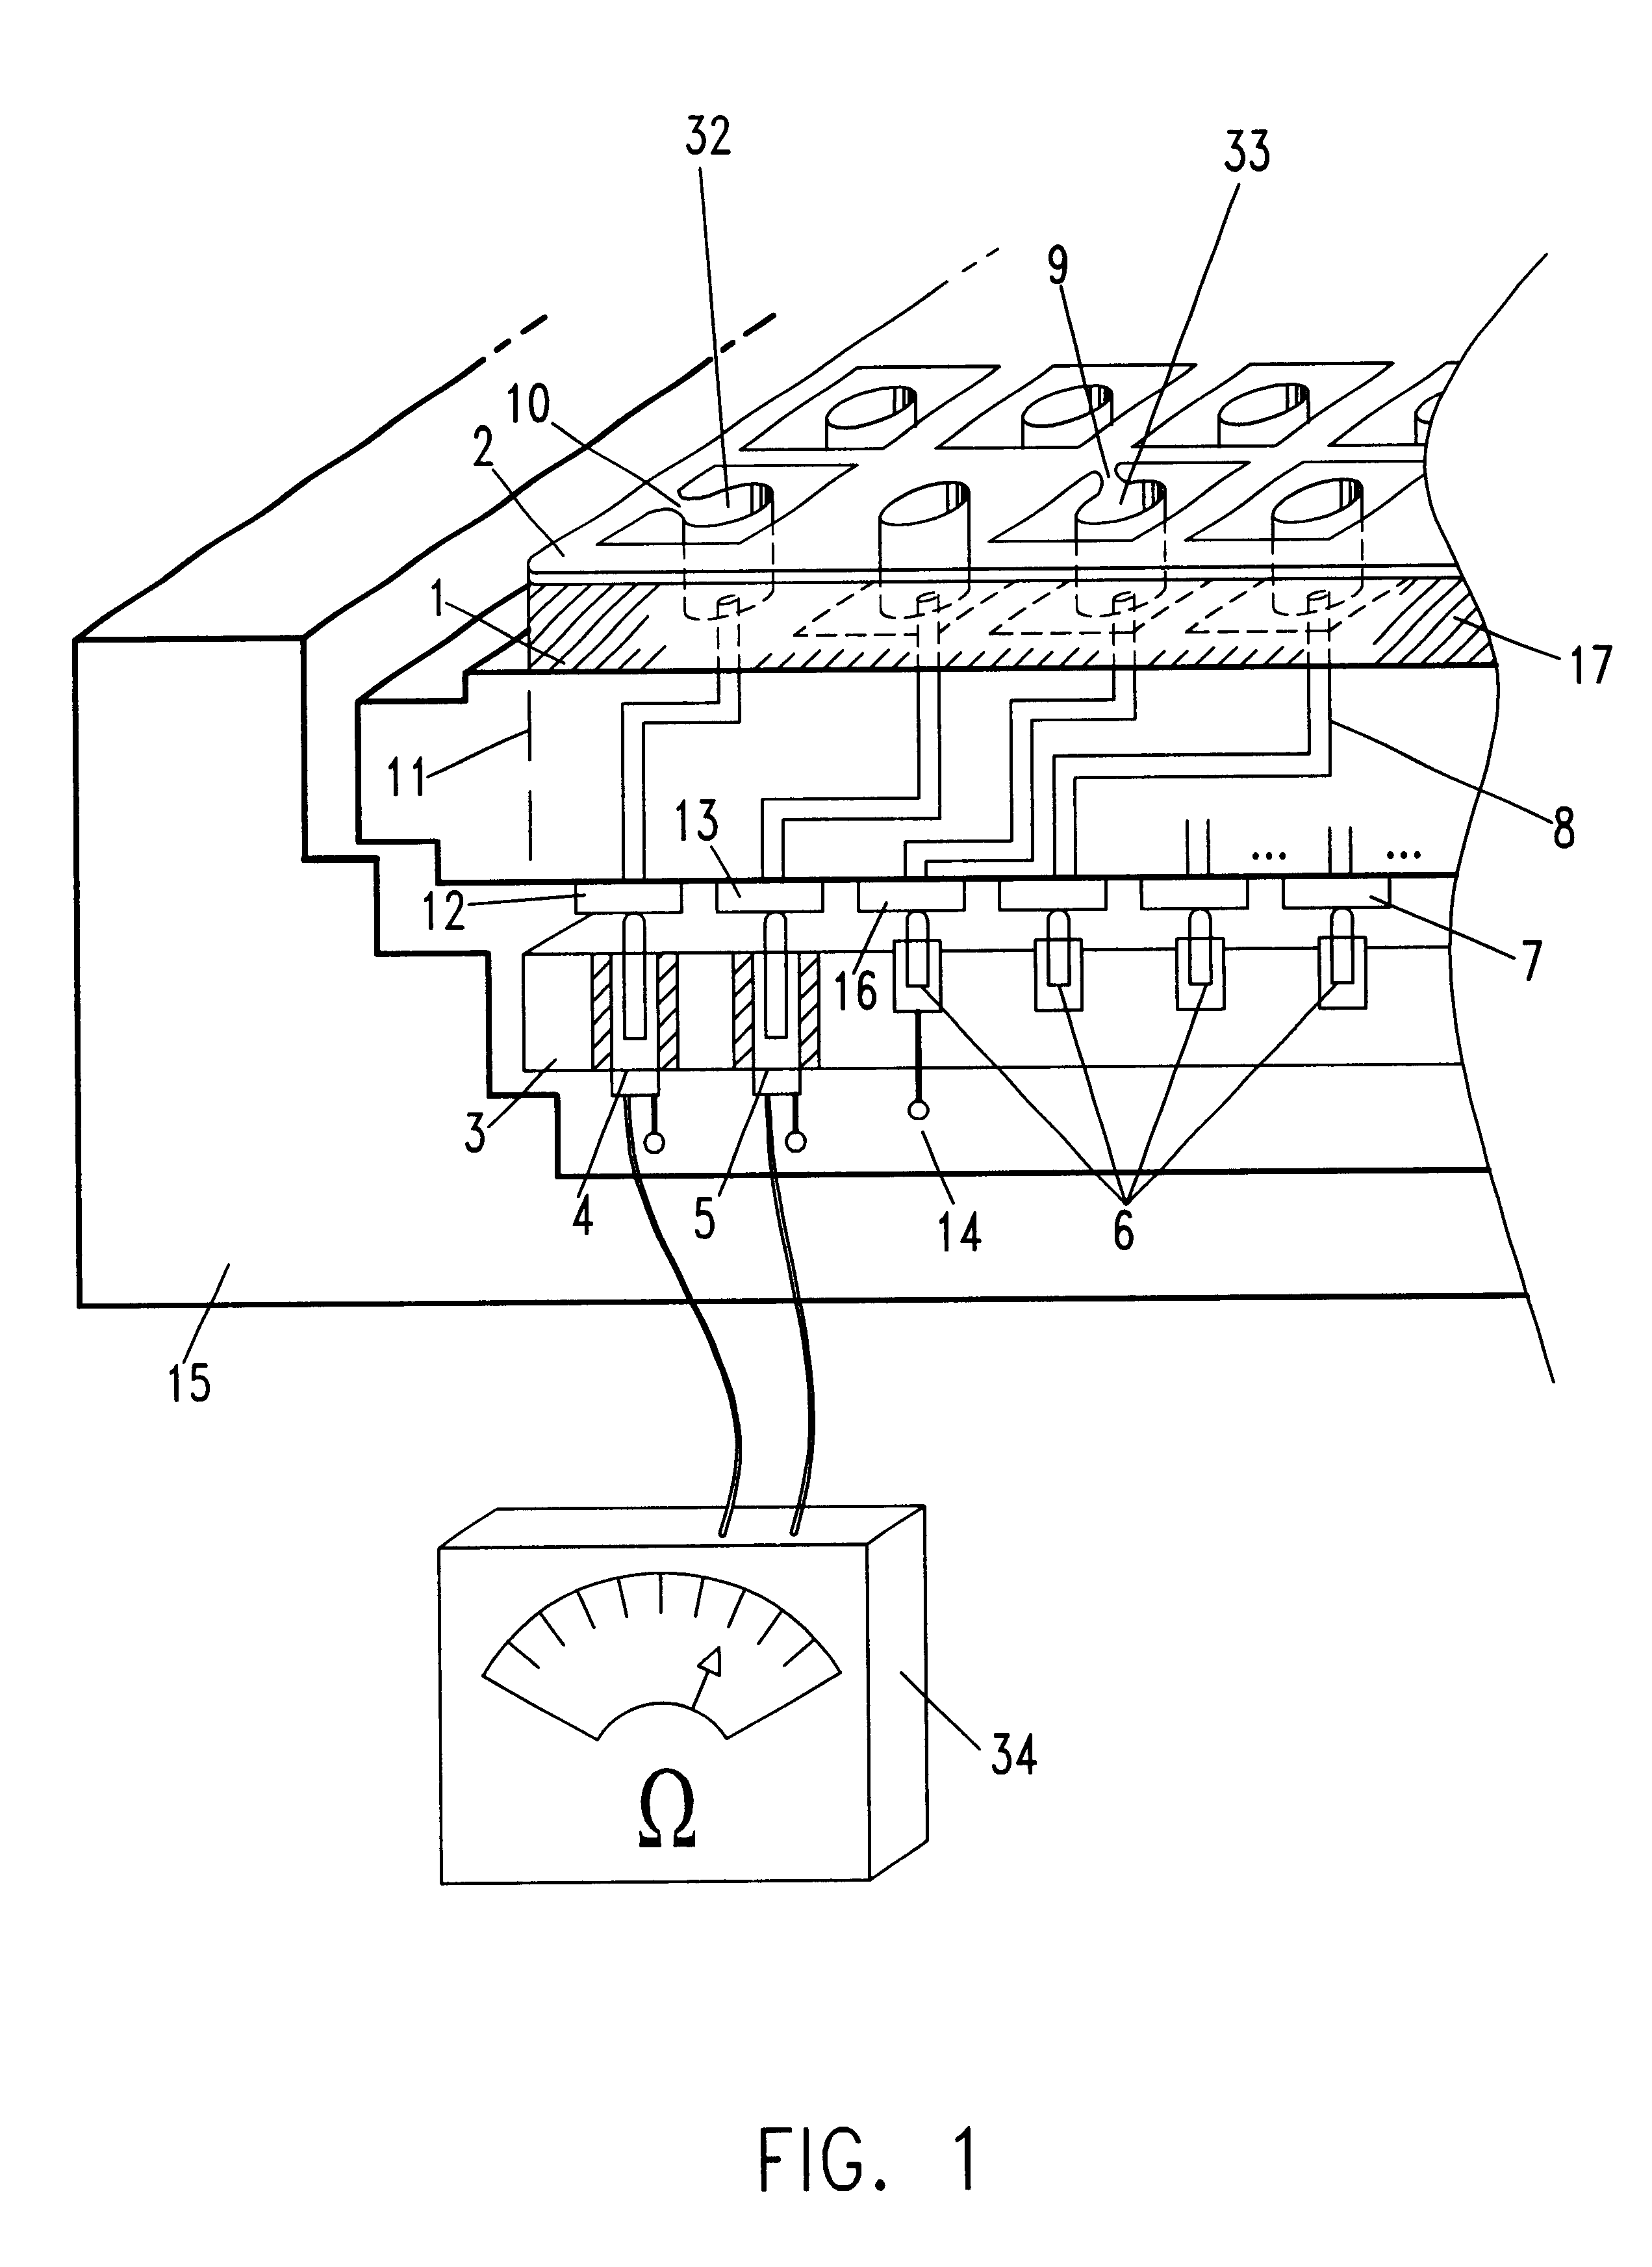 Method for detecting power plane-to-power plane shorts and I/O net-to power plane shorts in modules and printed circuit boards